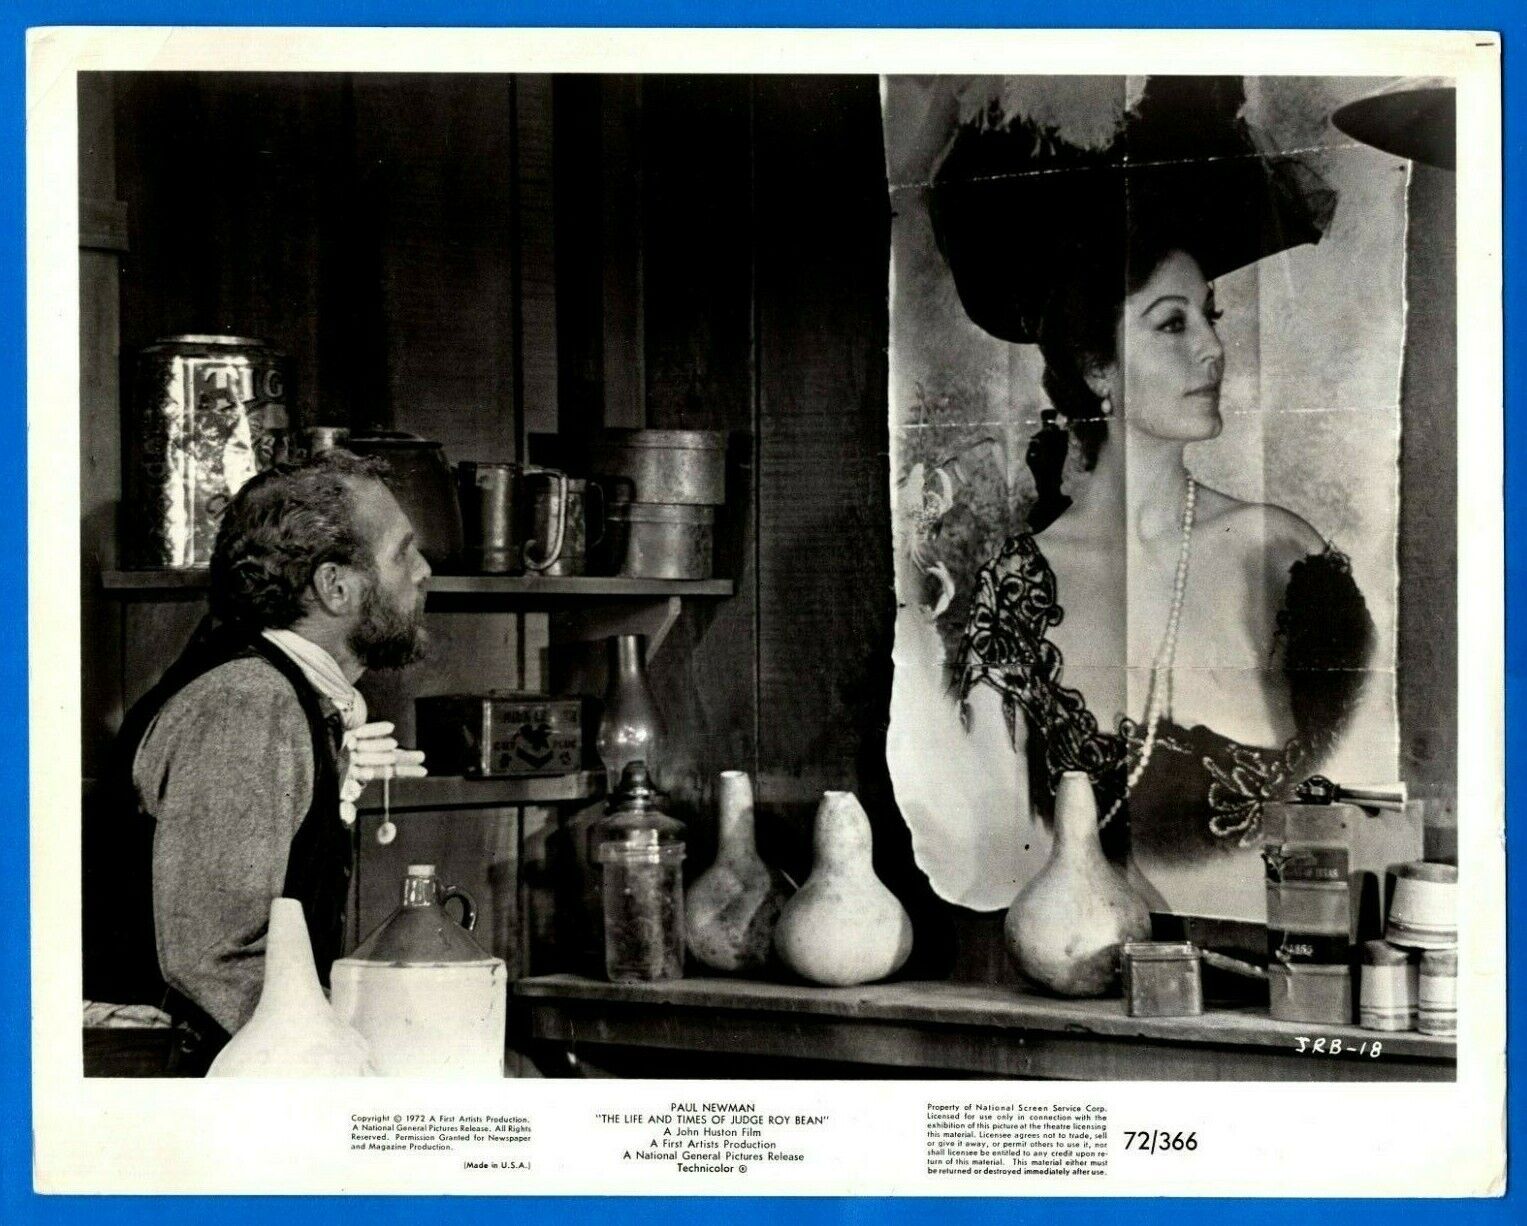 PAUL NEWMAN AVA GARDNER Vintage 8x10 Photo Poster painting 1972 LIFE AND TIMES OF JUDGE ROY BEAN